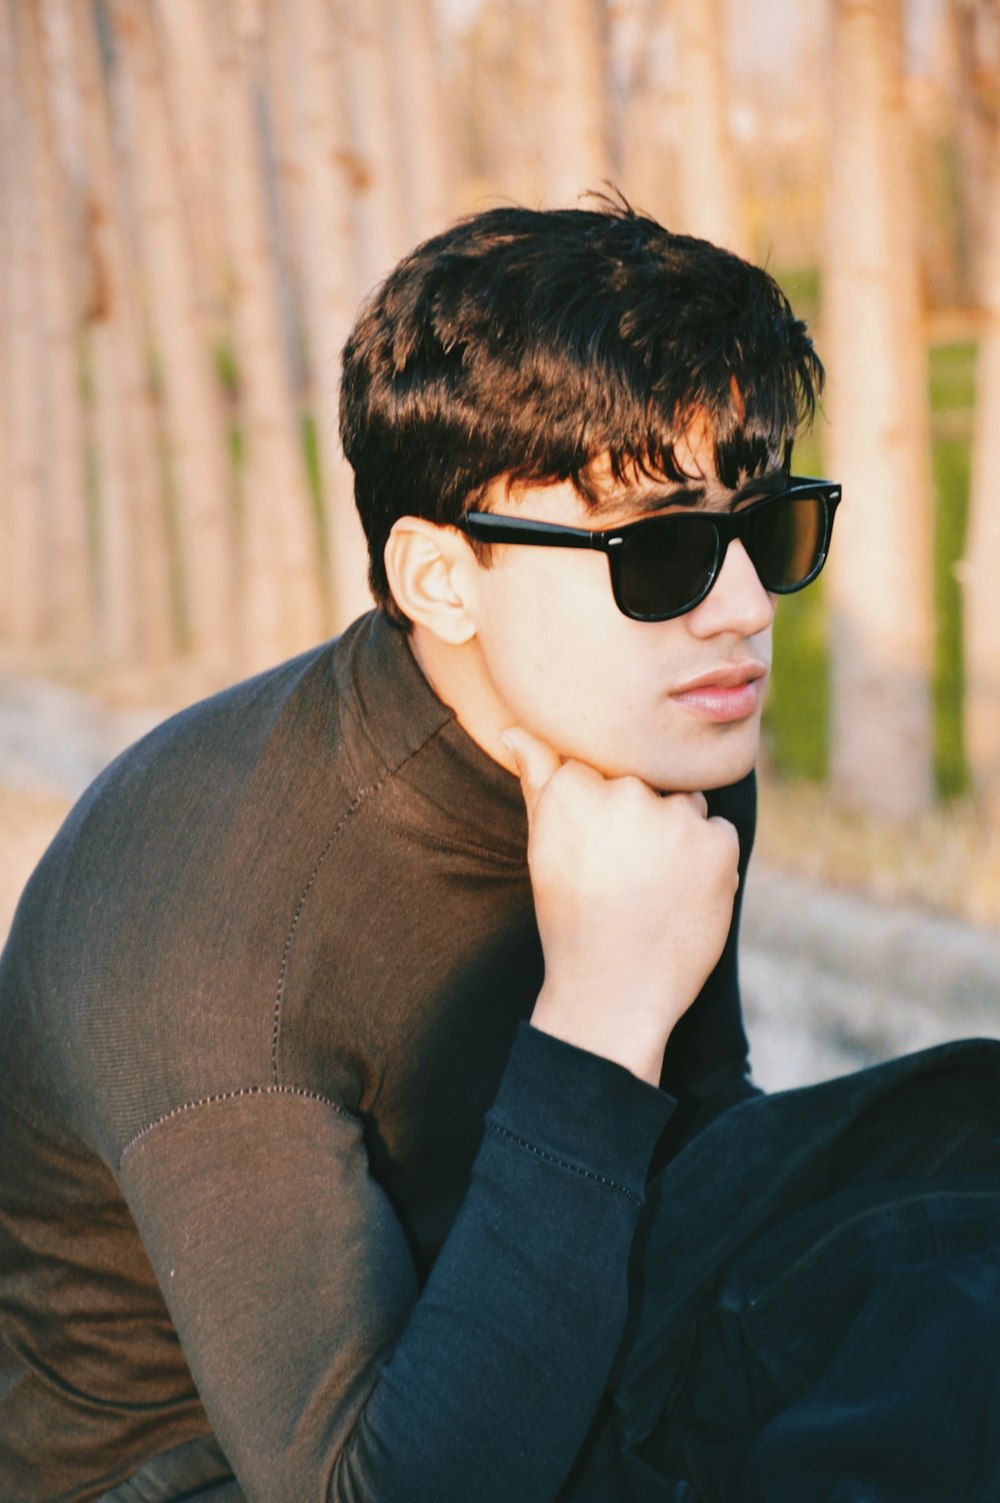 a young man wearing sunglasses sitting on a bench